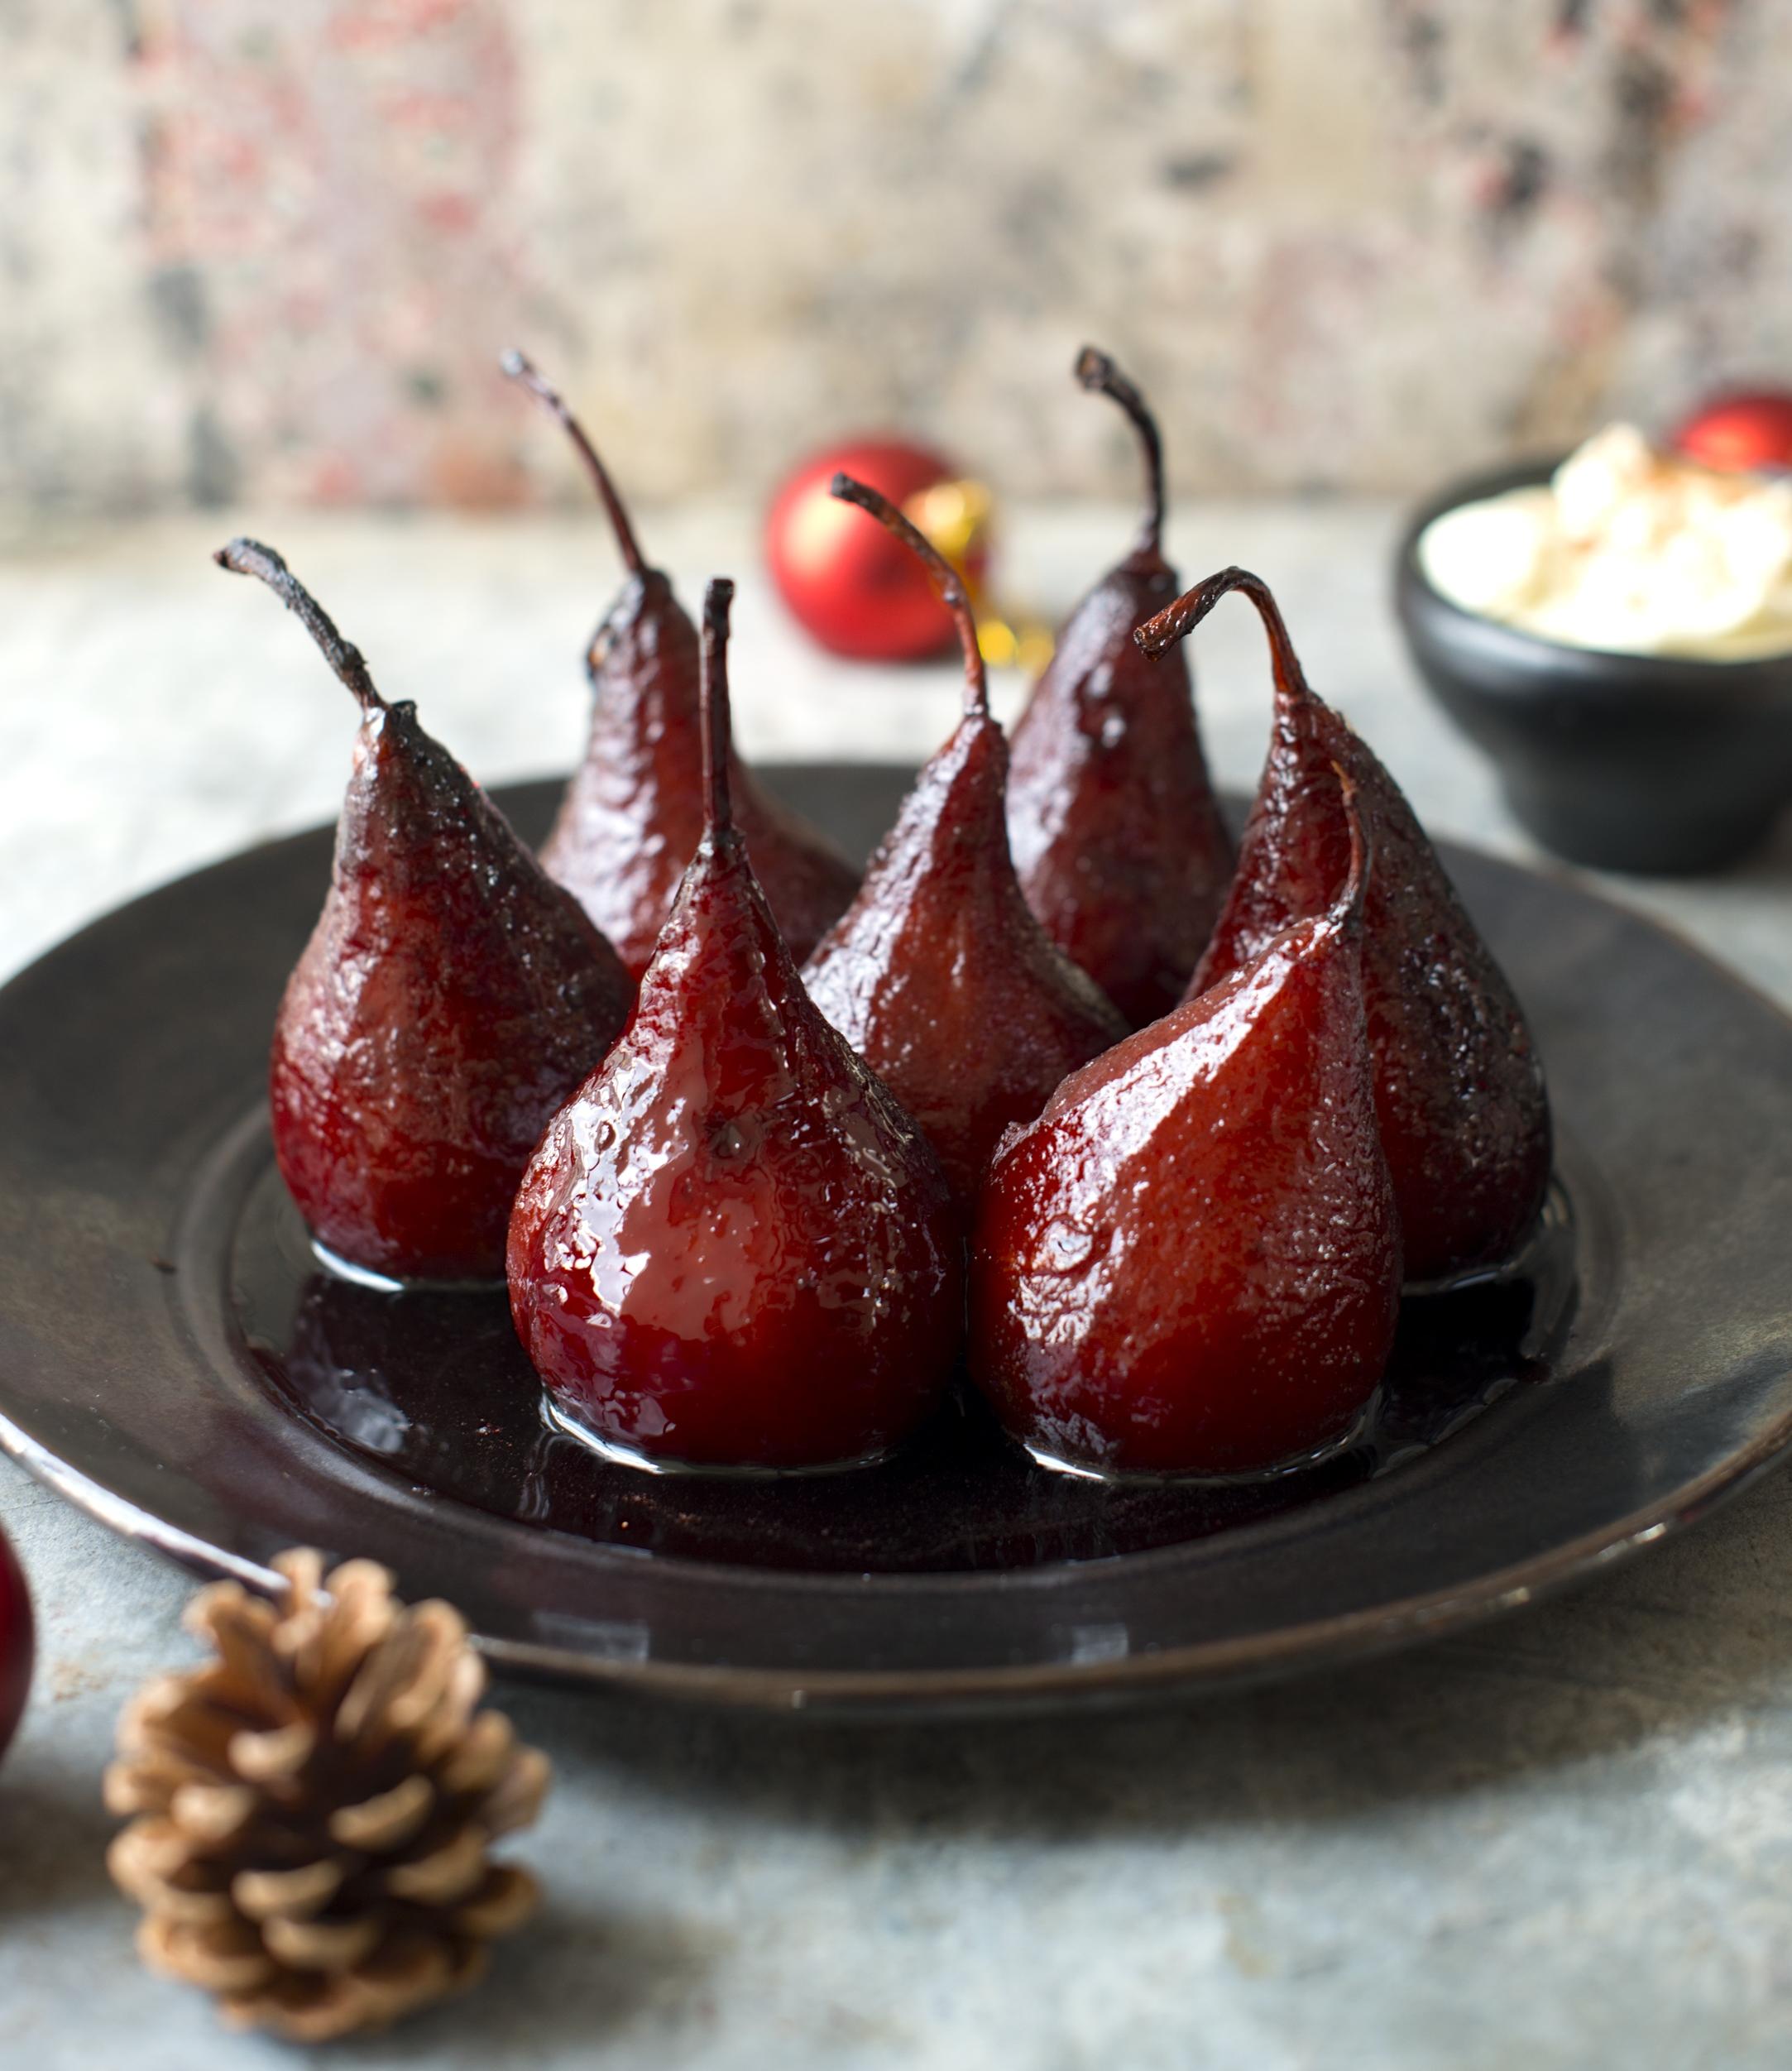  The perfect winter dessert: spiced wine poached pears!